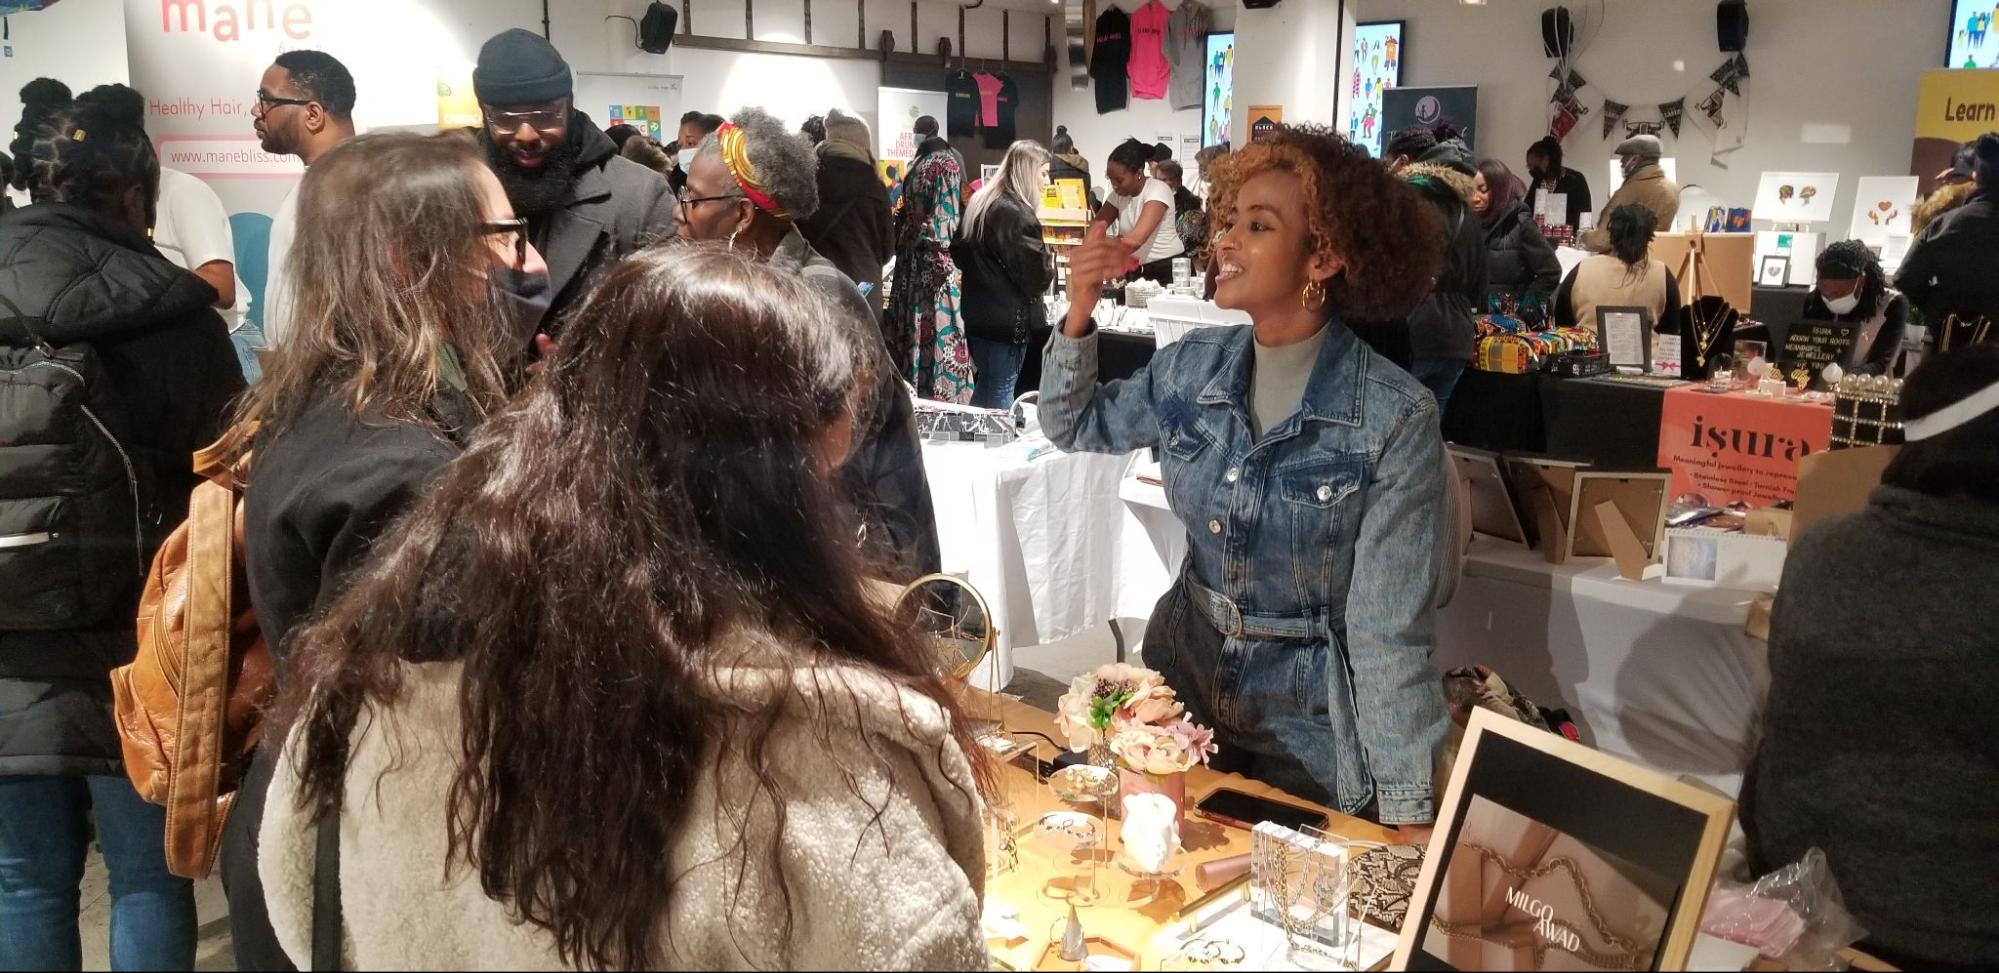 People buying and selling at a pop-up market